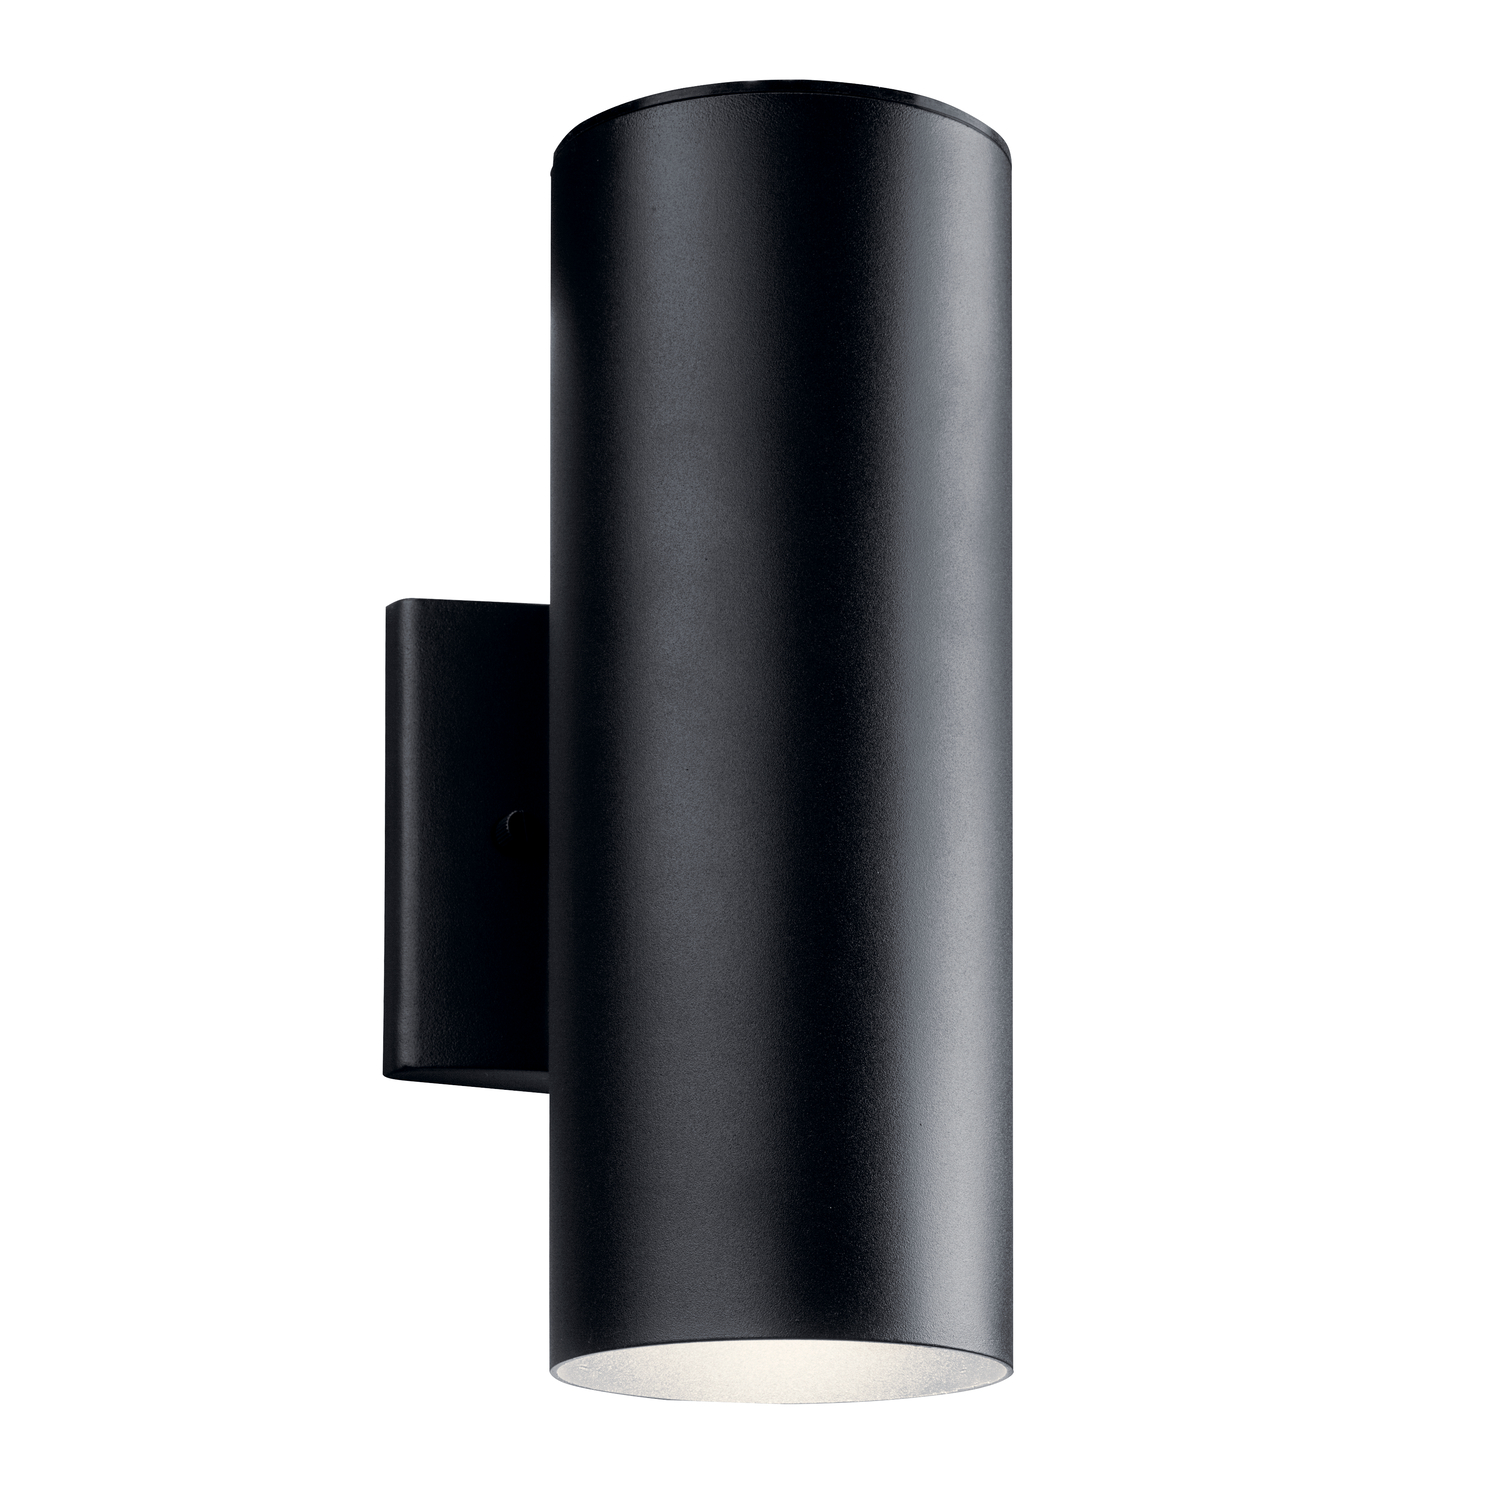 Kichler 12" 1 Light Integrated LED Textured Black Cylinder Outdoor Wall Sconce - image 1 of 7